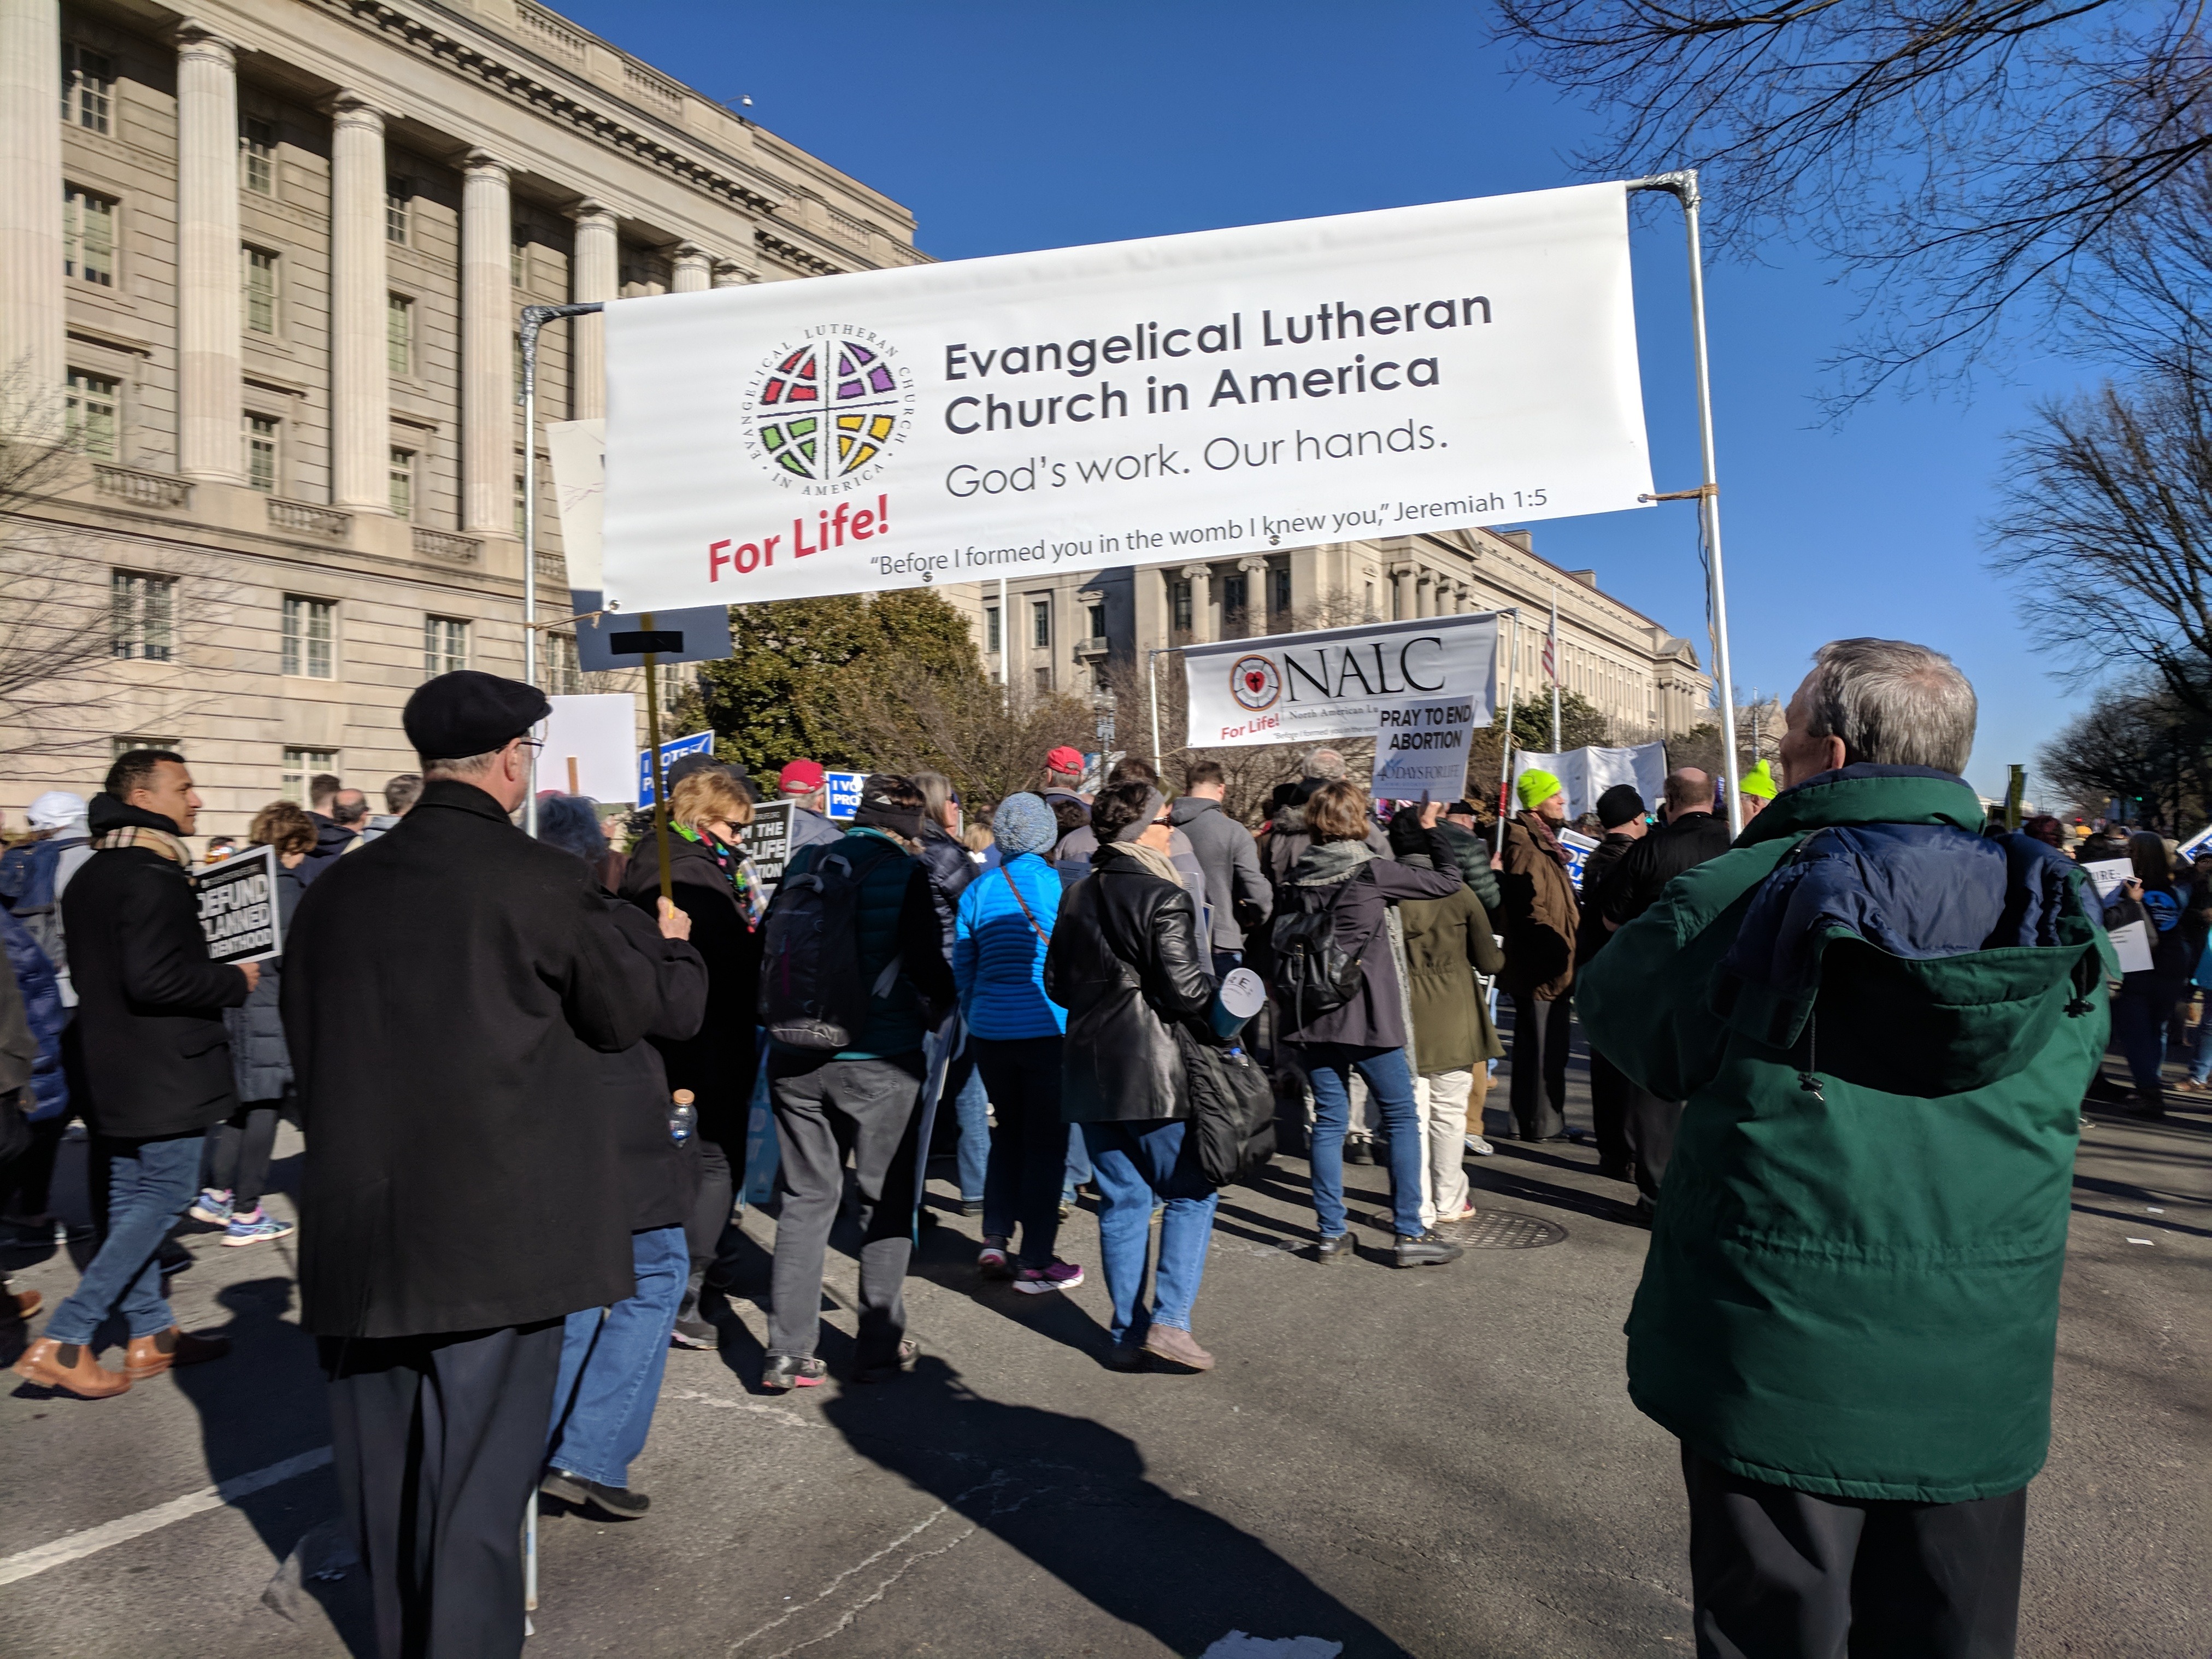 Marching for Life in 2018